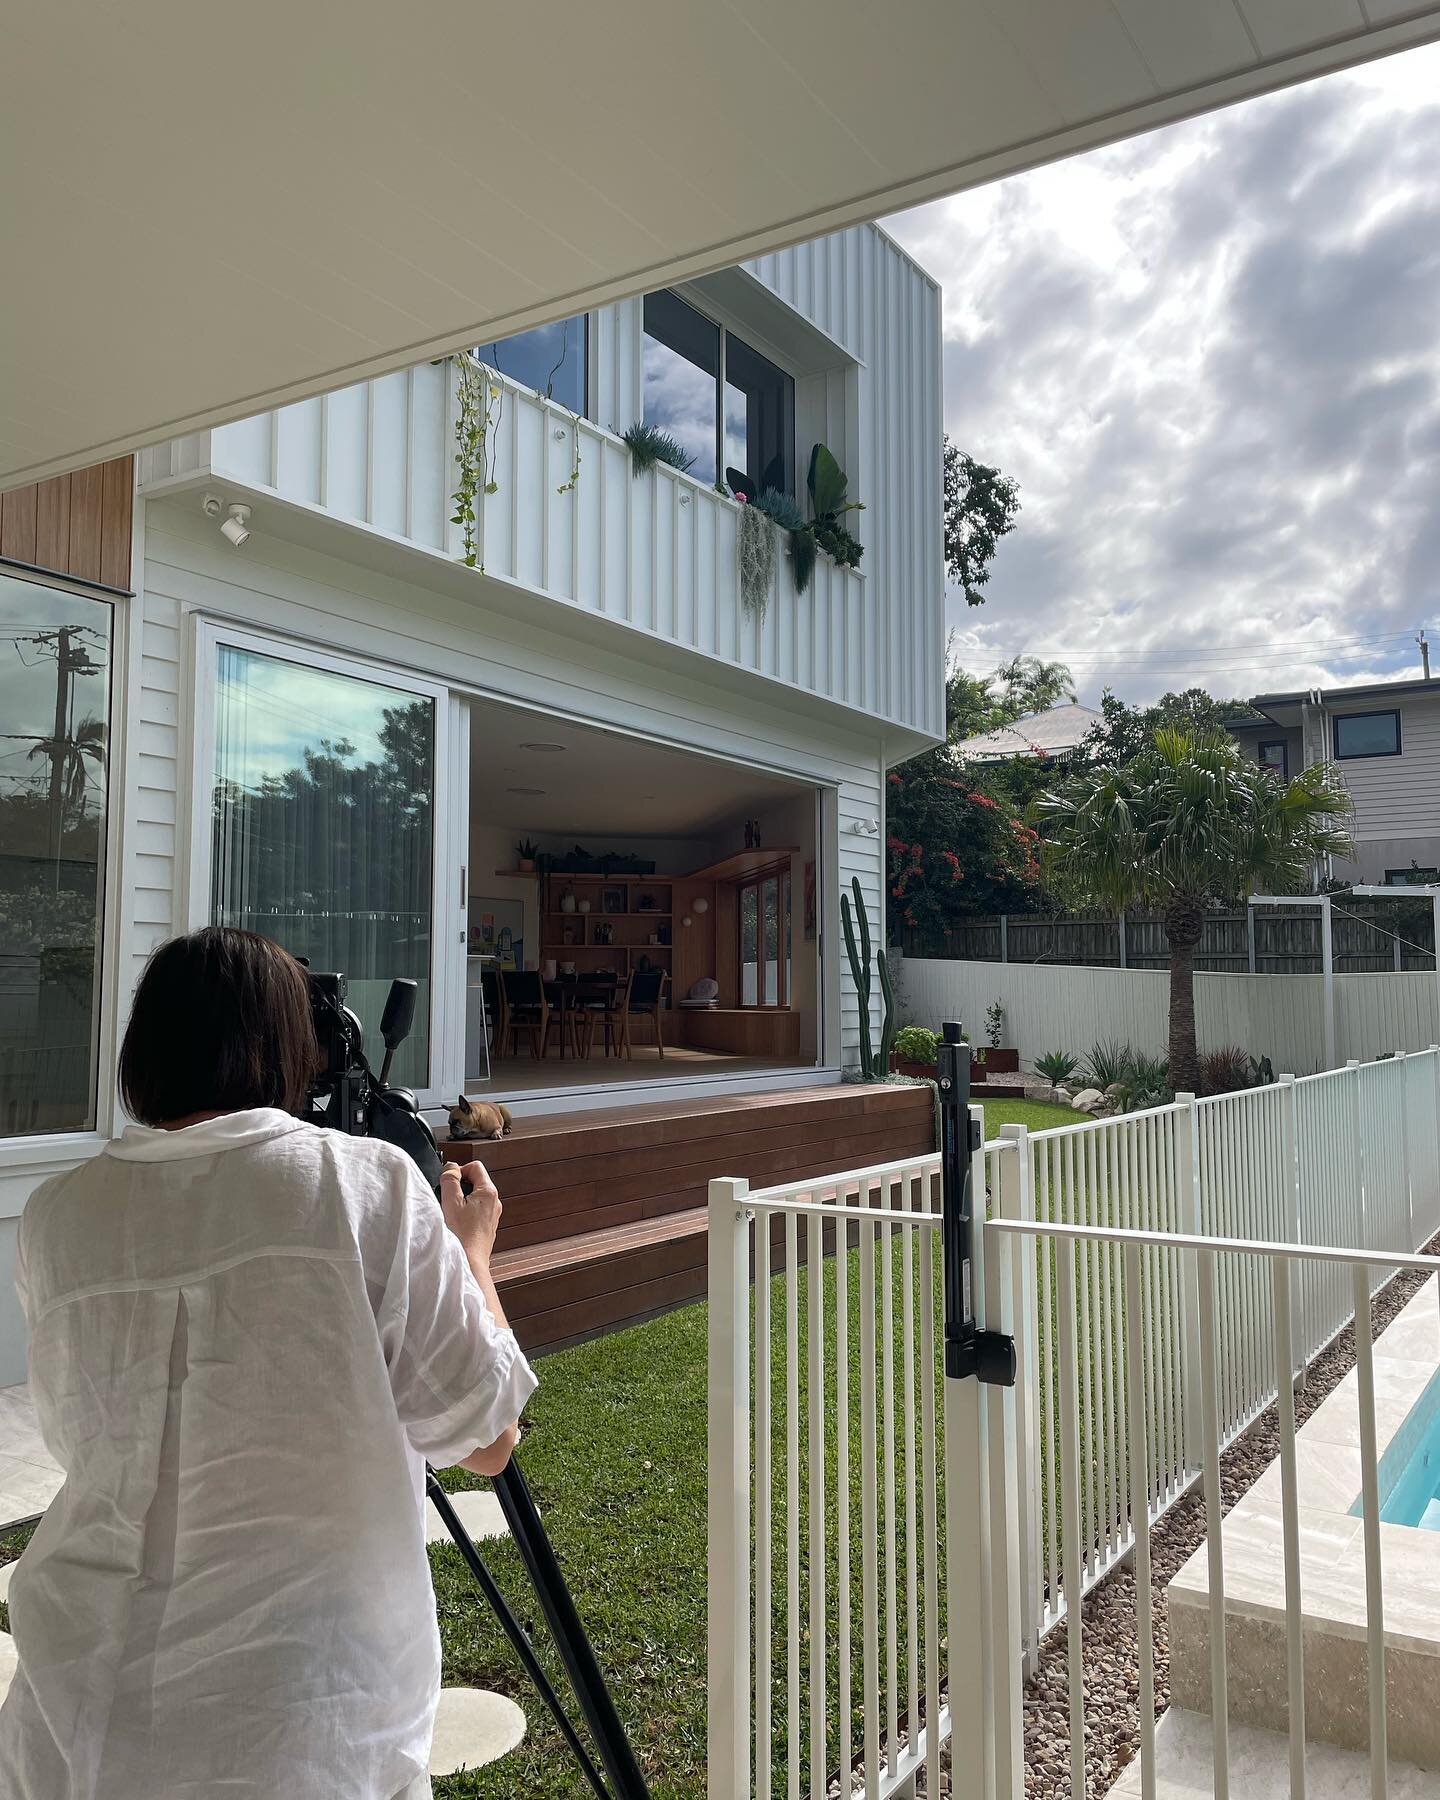 Behind the scenes with @mindicooke at S+R house. Finally good weather for the shoot! Thank you to infinity and beyond to the clients S+R for letting us in, for their awesome taste in decor, for the efforts in making the house beautiful for us, and fo